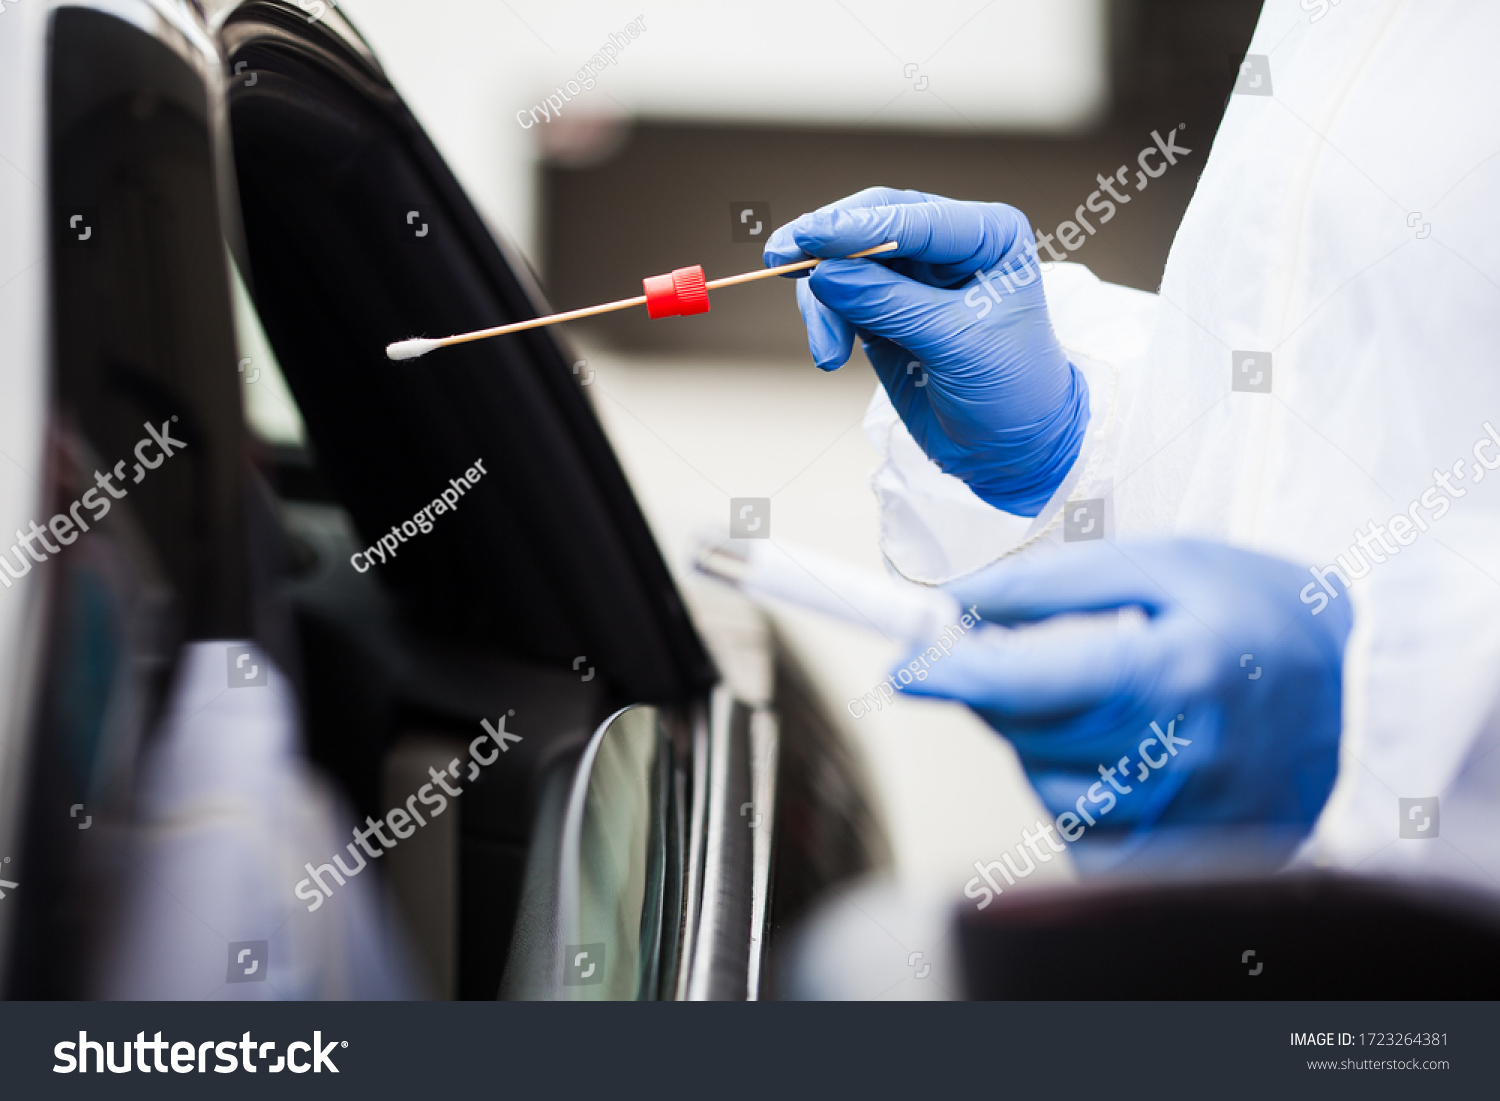 Medical worker wearing personal PPE surgical gloves and protective clothing,holding nasal swab,performing drive-thru COVID-19 testing,point of care on site location for PCR detection of Coronavirus  #1723264381